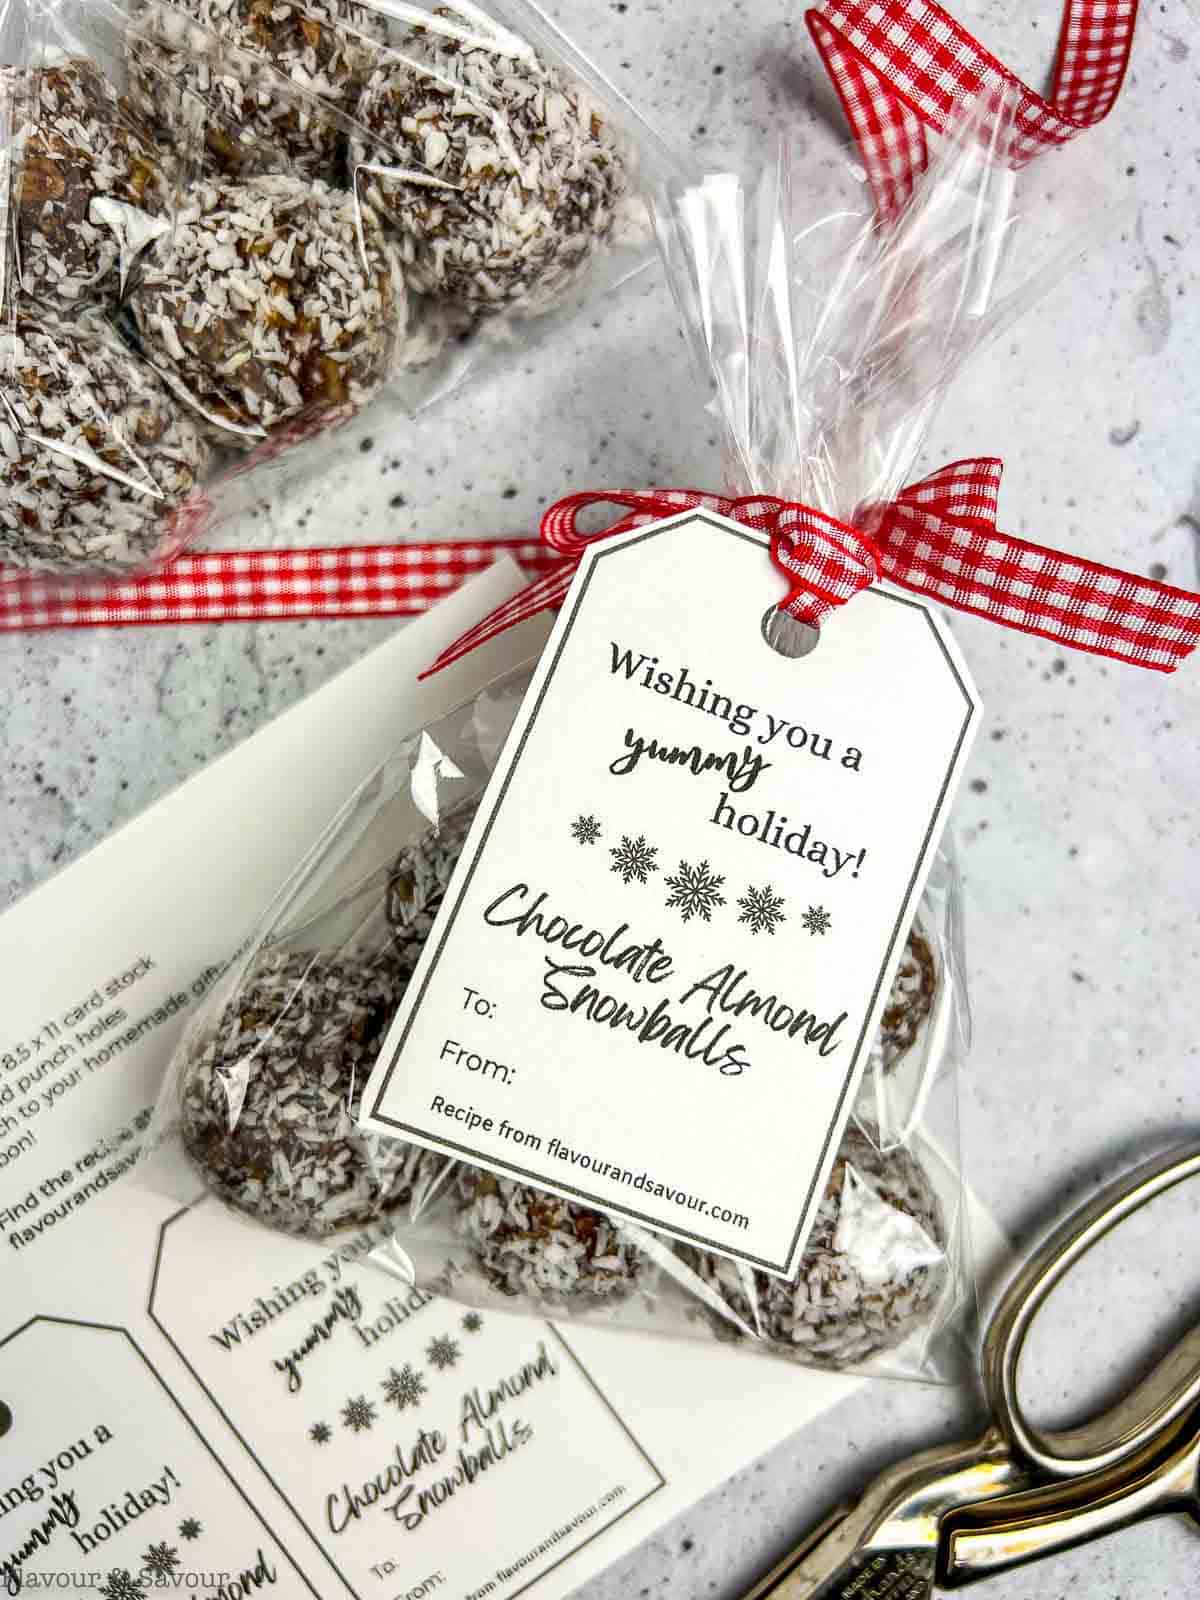 Chocolate almond snowballs in a cellophane bag with a gift tag.